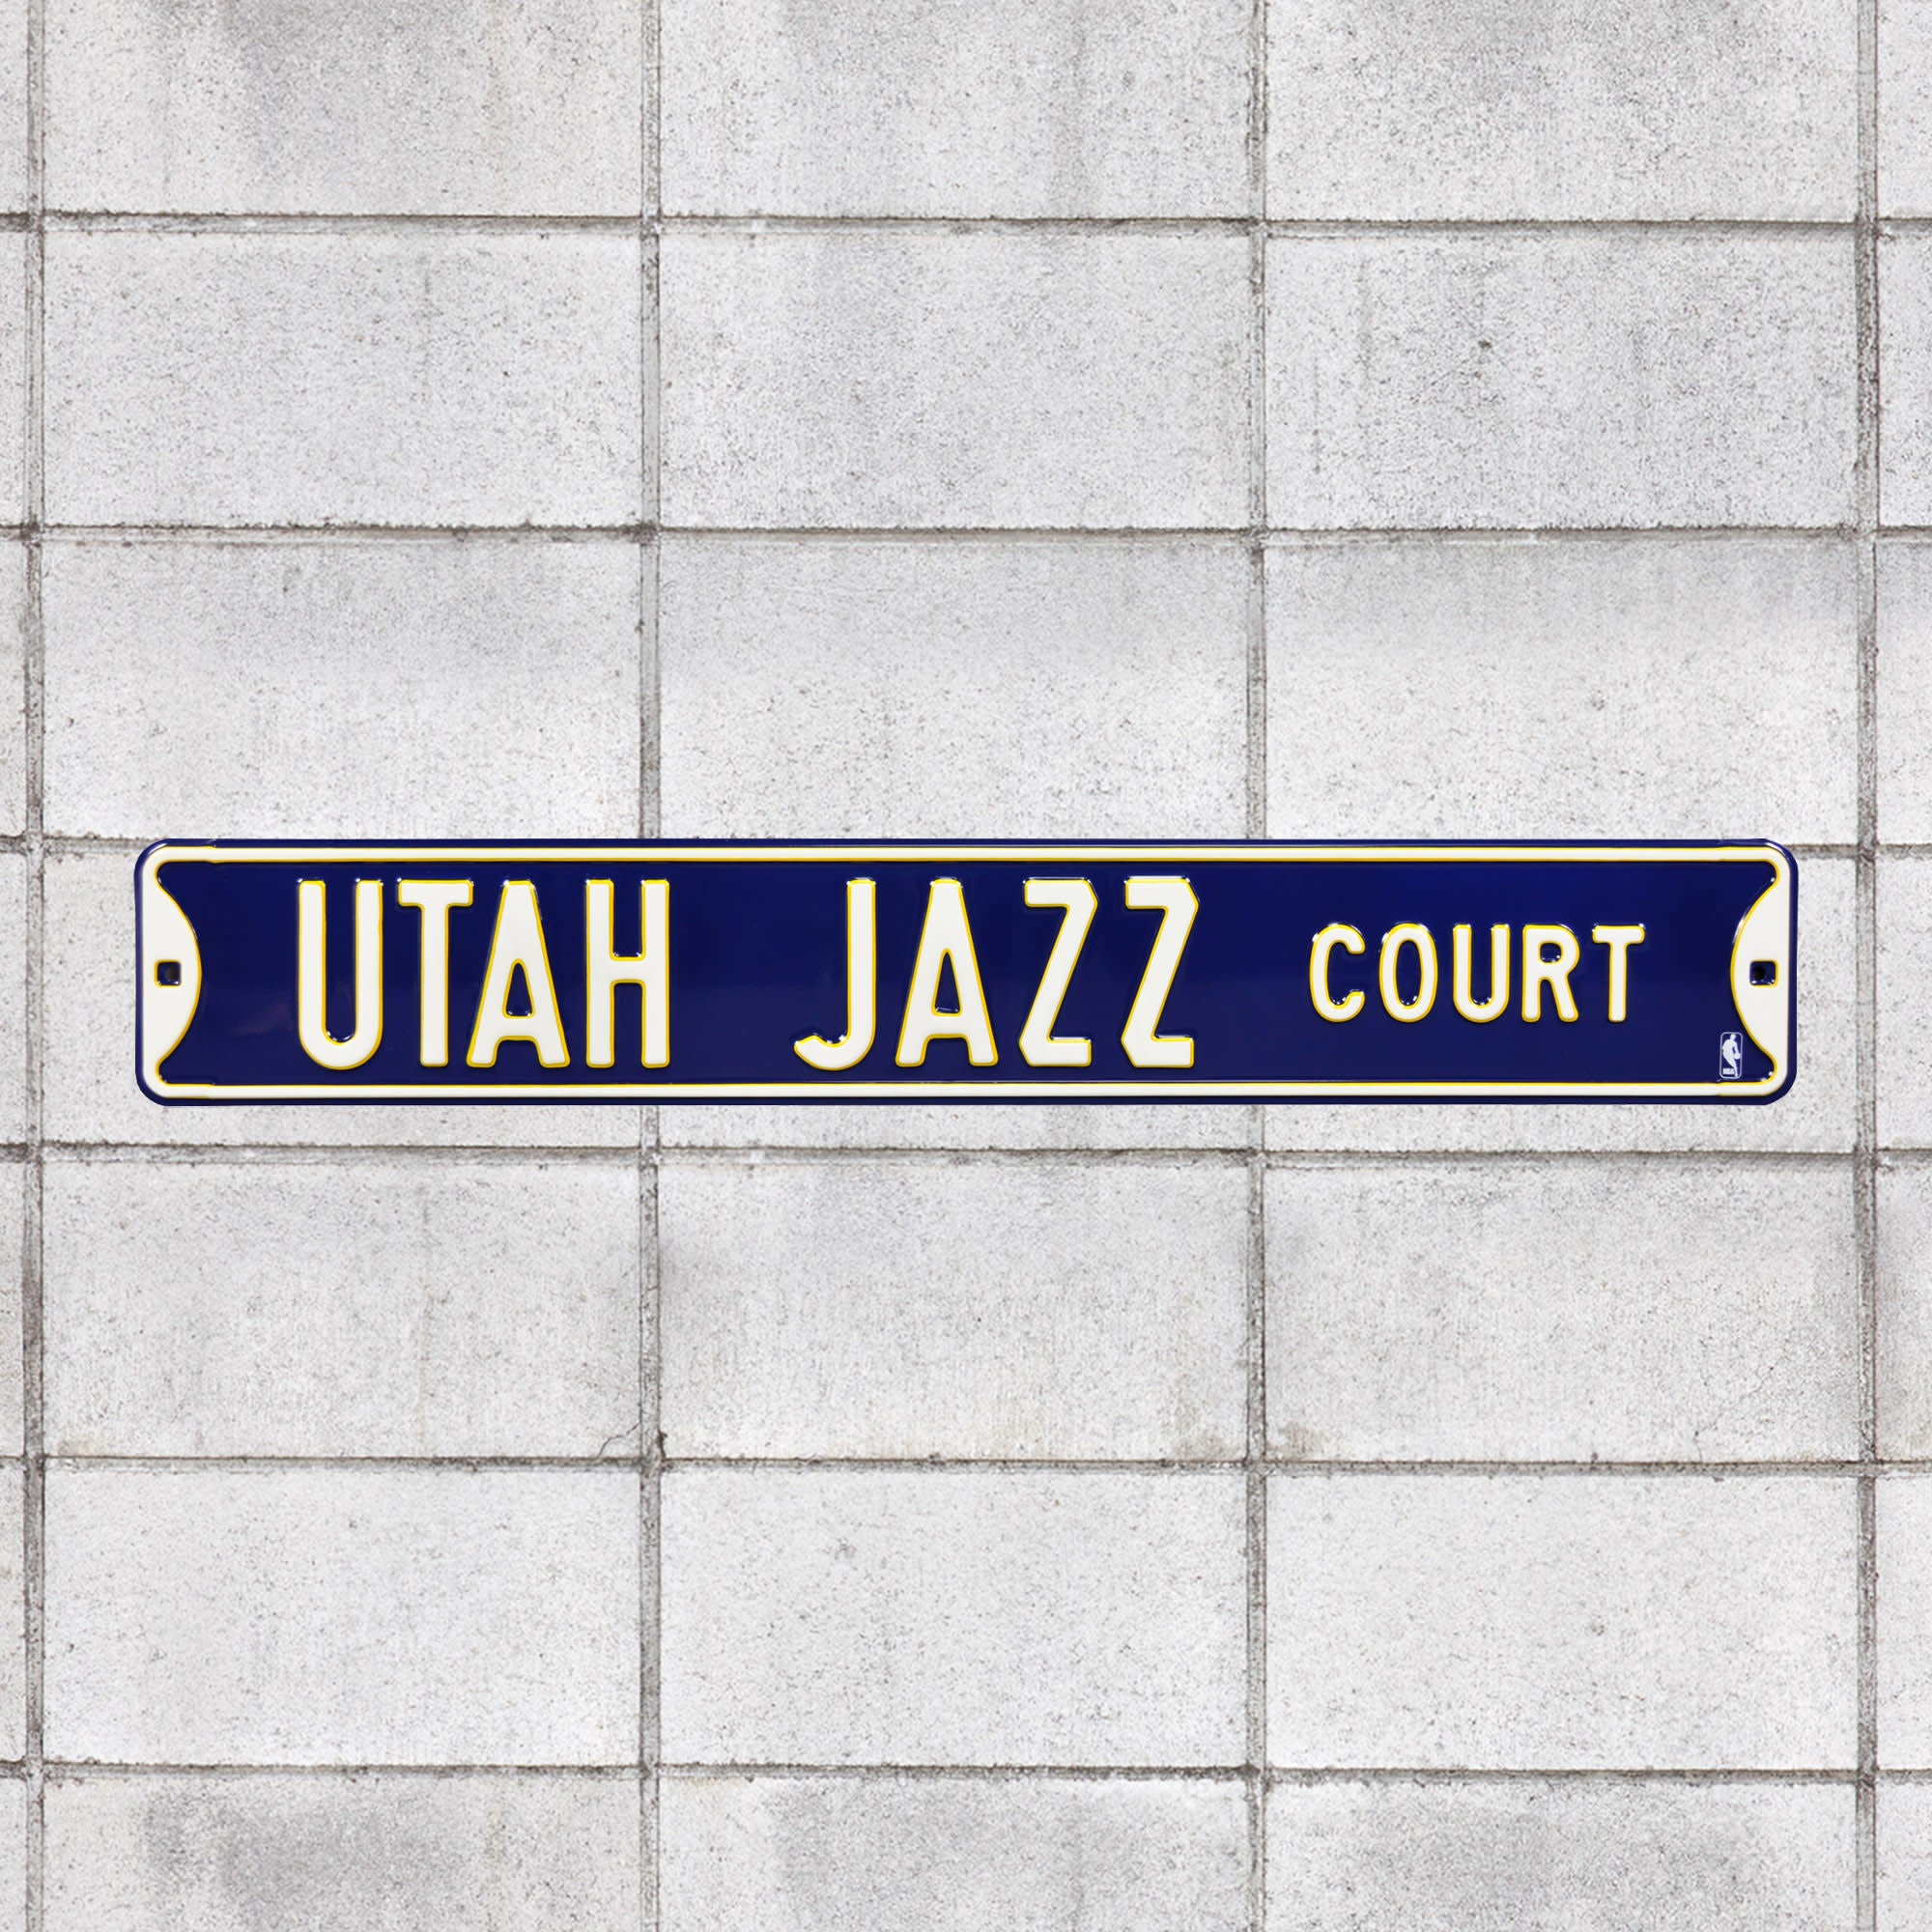 Utah Jazz: Court - Officially Licensed NBA Metal Street Sign by Fathead | 100% Steel